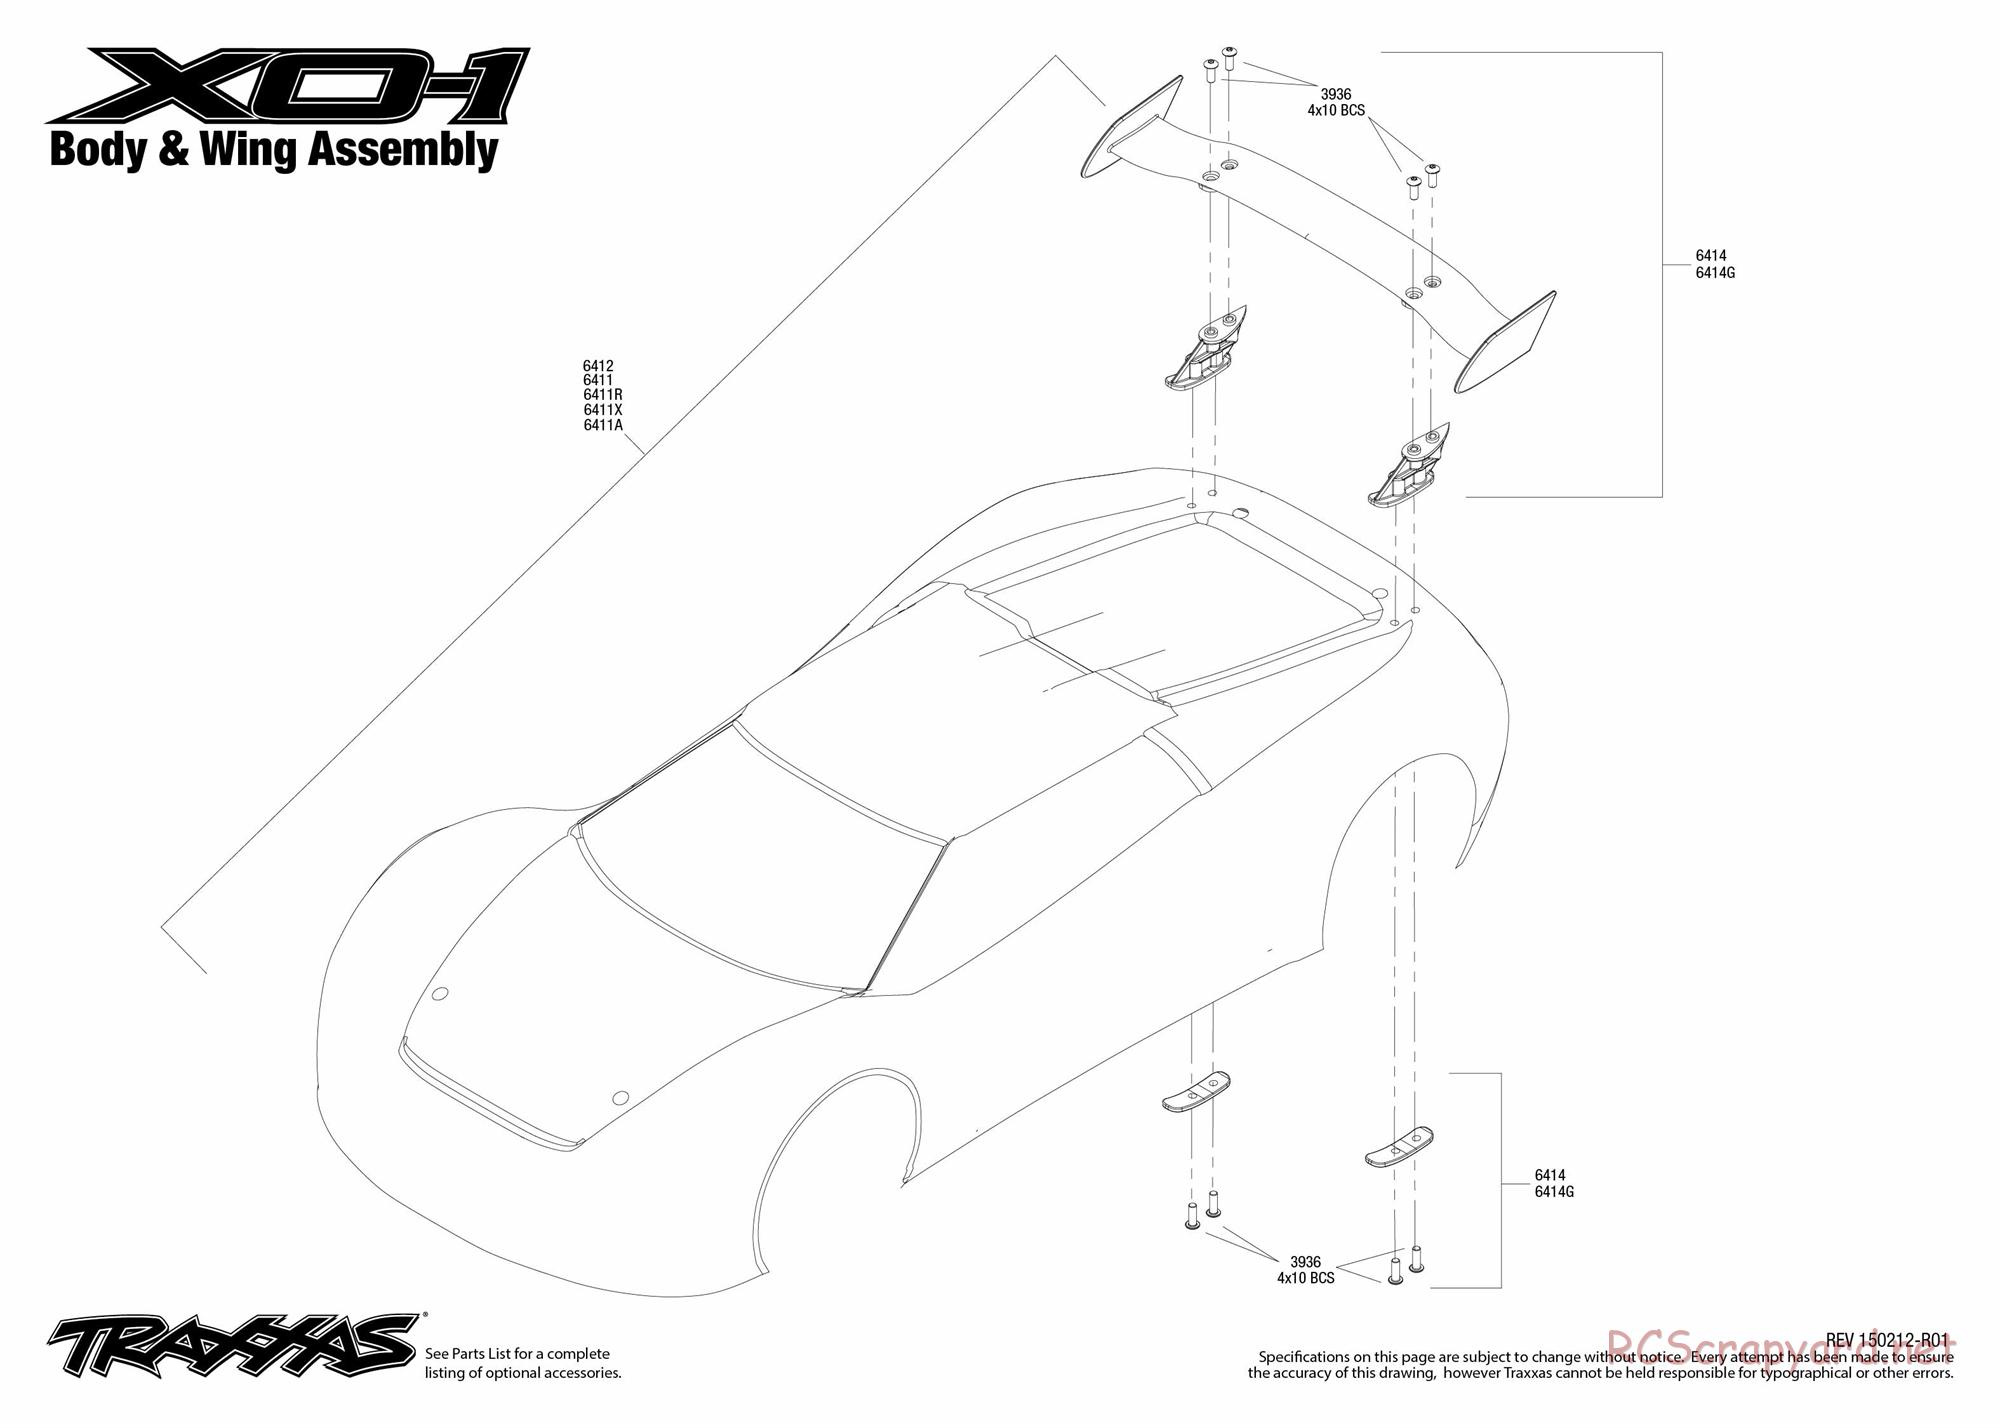 Traxxas - XO-1 (2014) - Exploded Views - Page 1